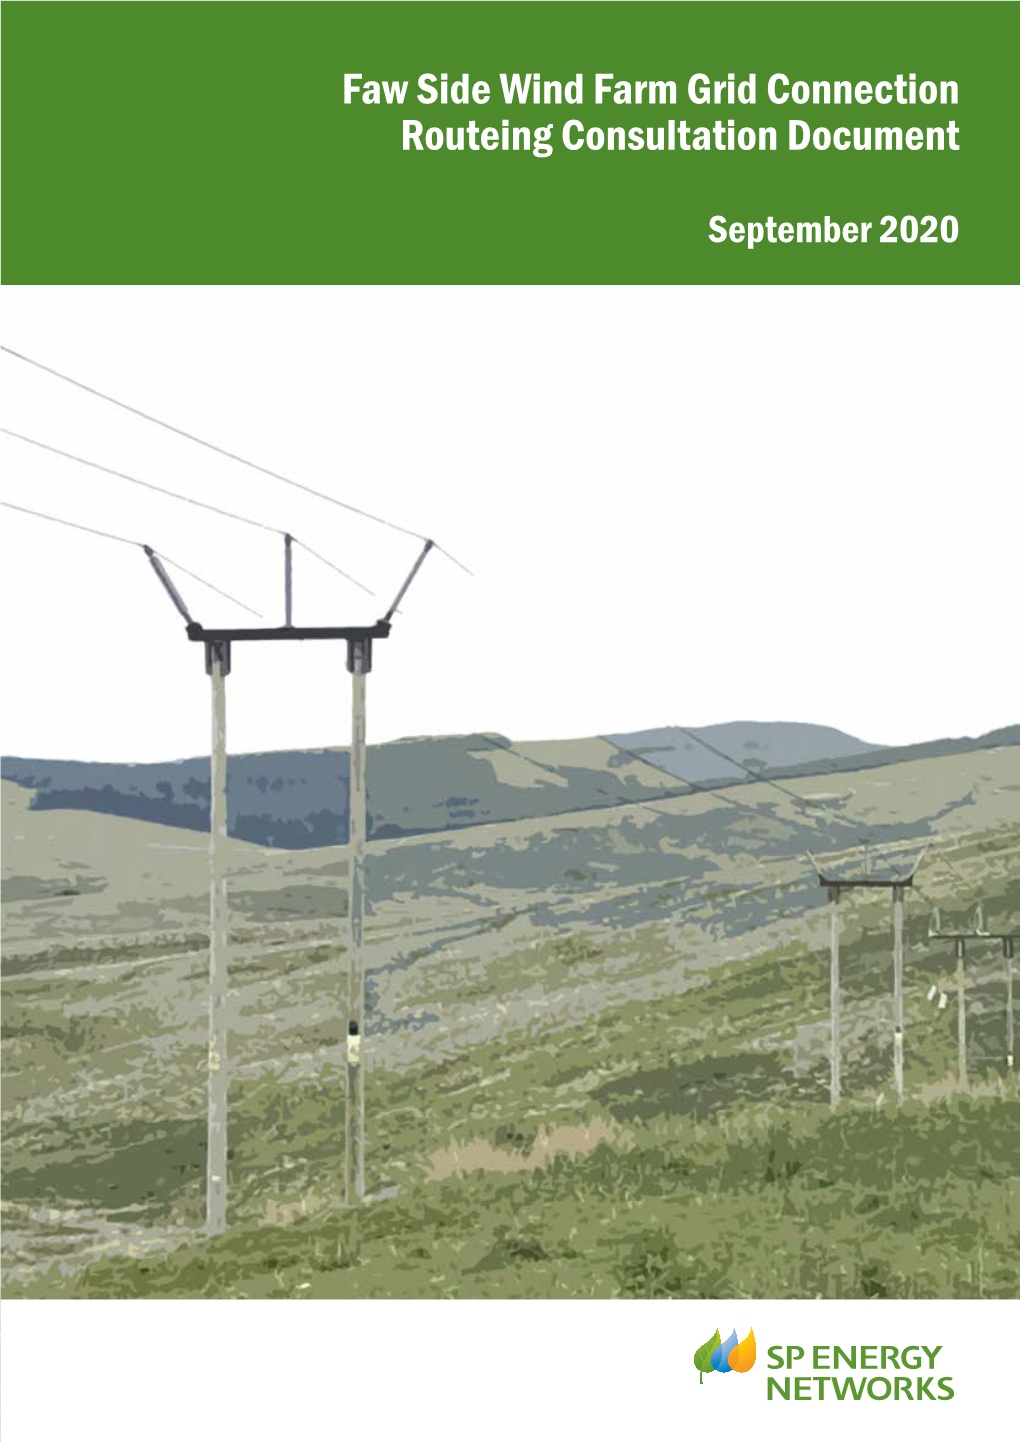 Faw Side Wind Farm Grid Connection Routeing Consultation Document